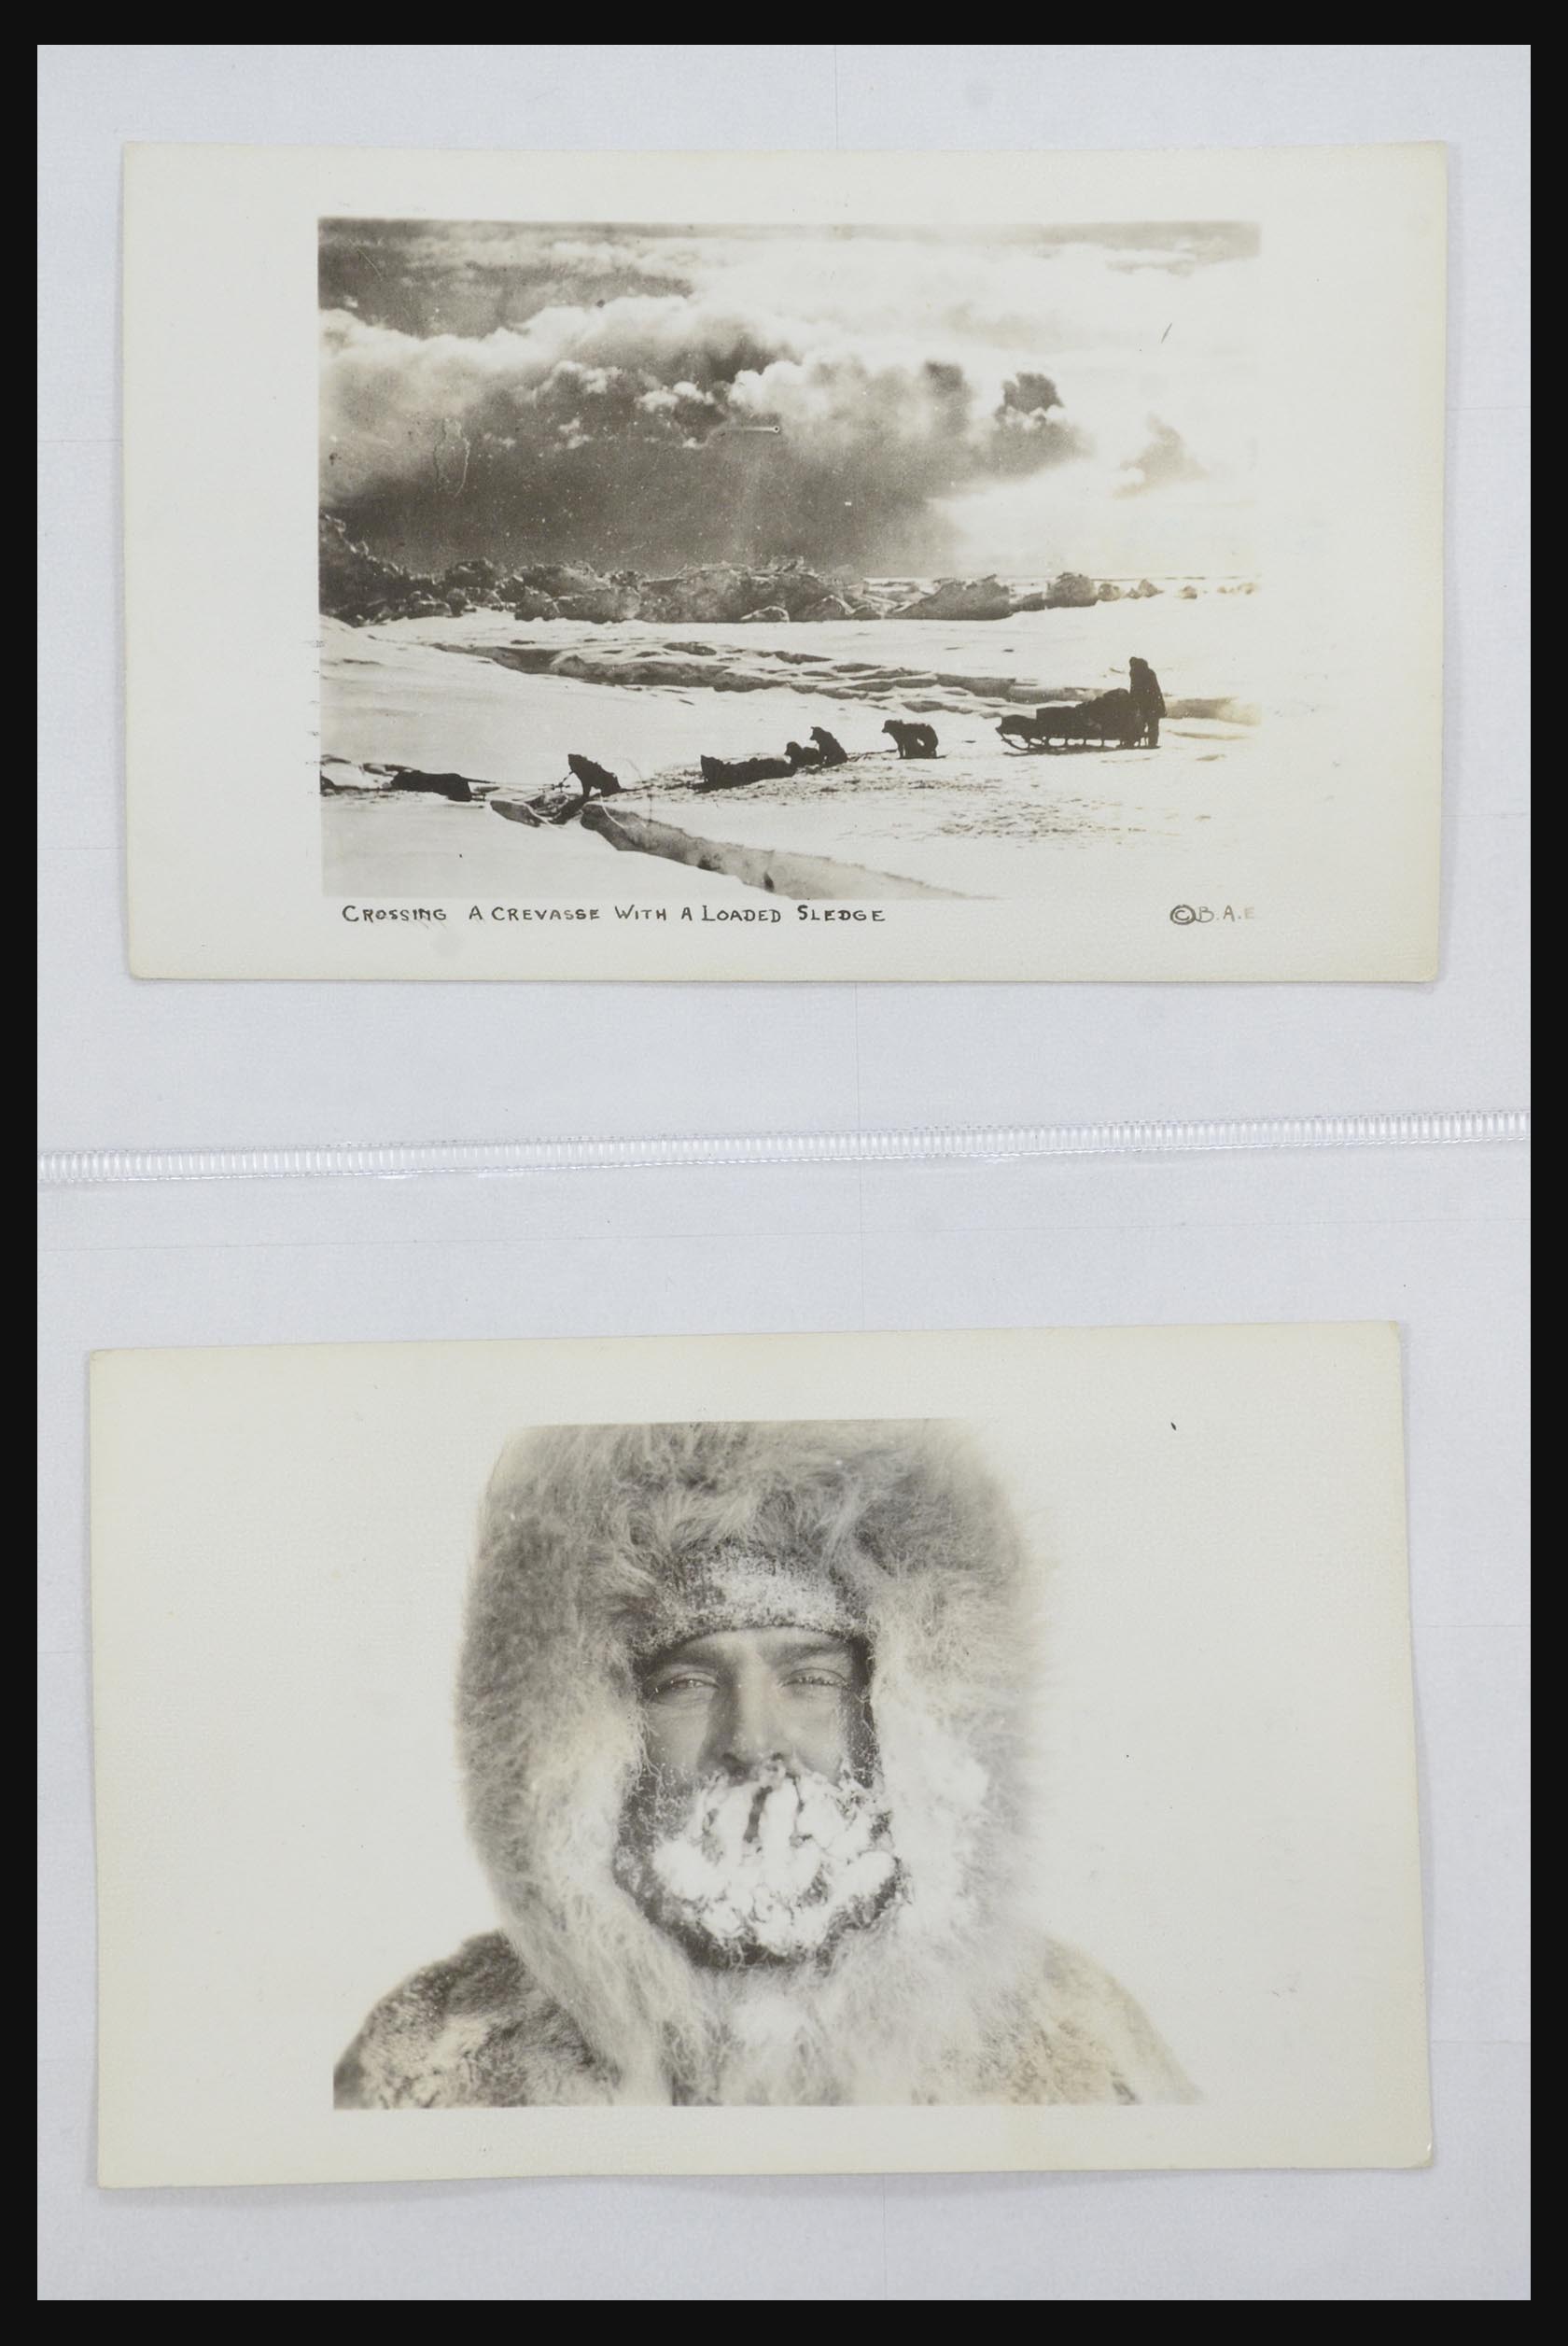 31627 027 - 31627 Byrd Antarctic Expedition 1934.